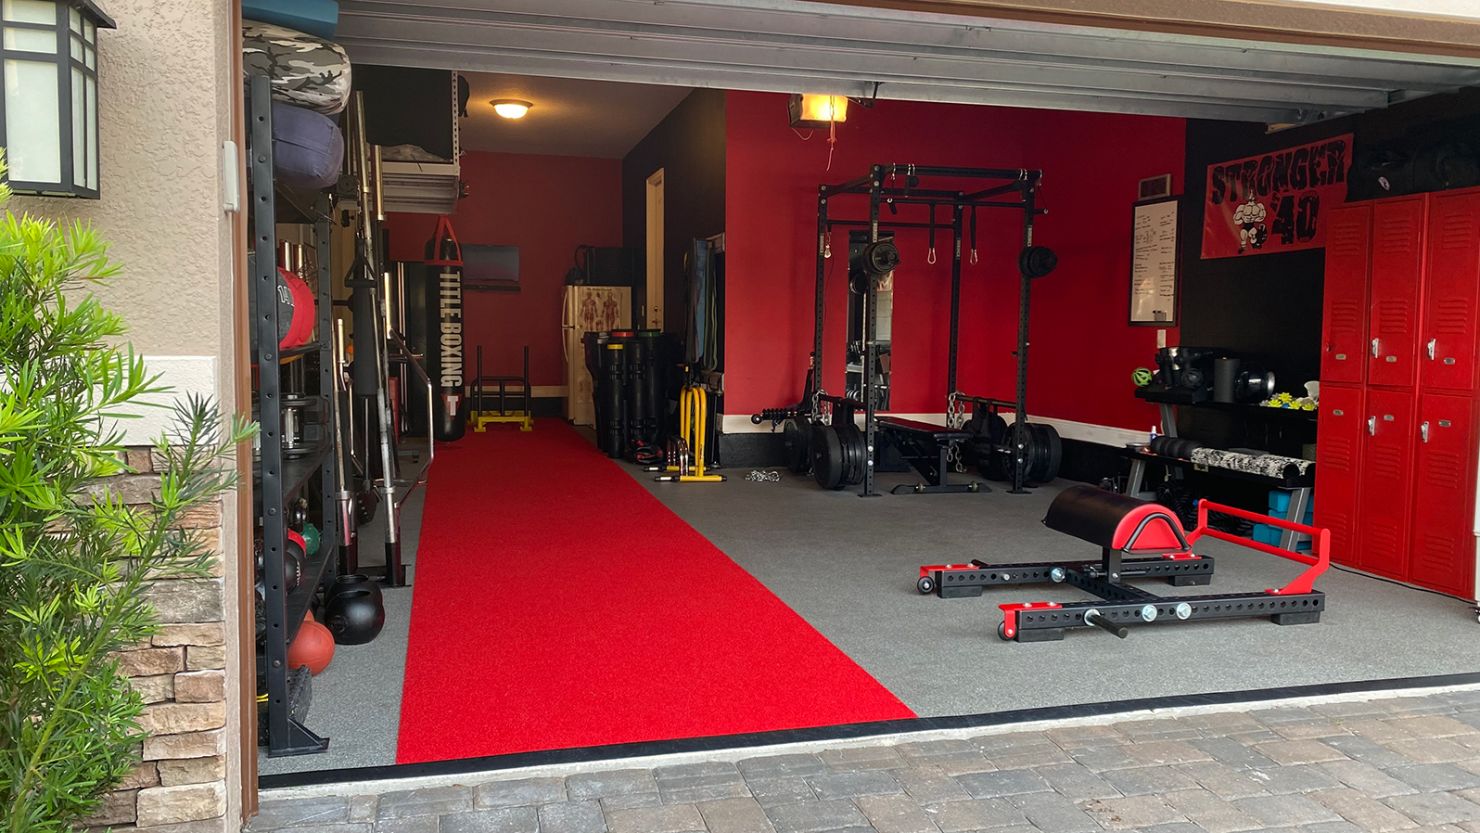 How to set up a home gym space that works for you